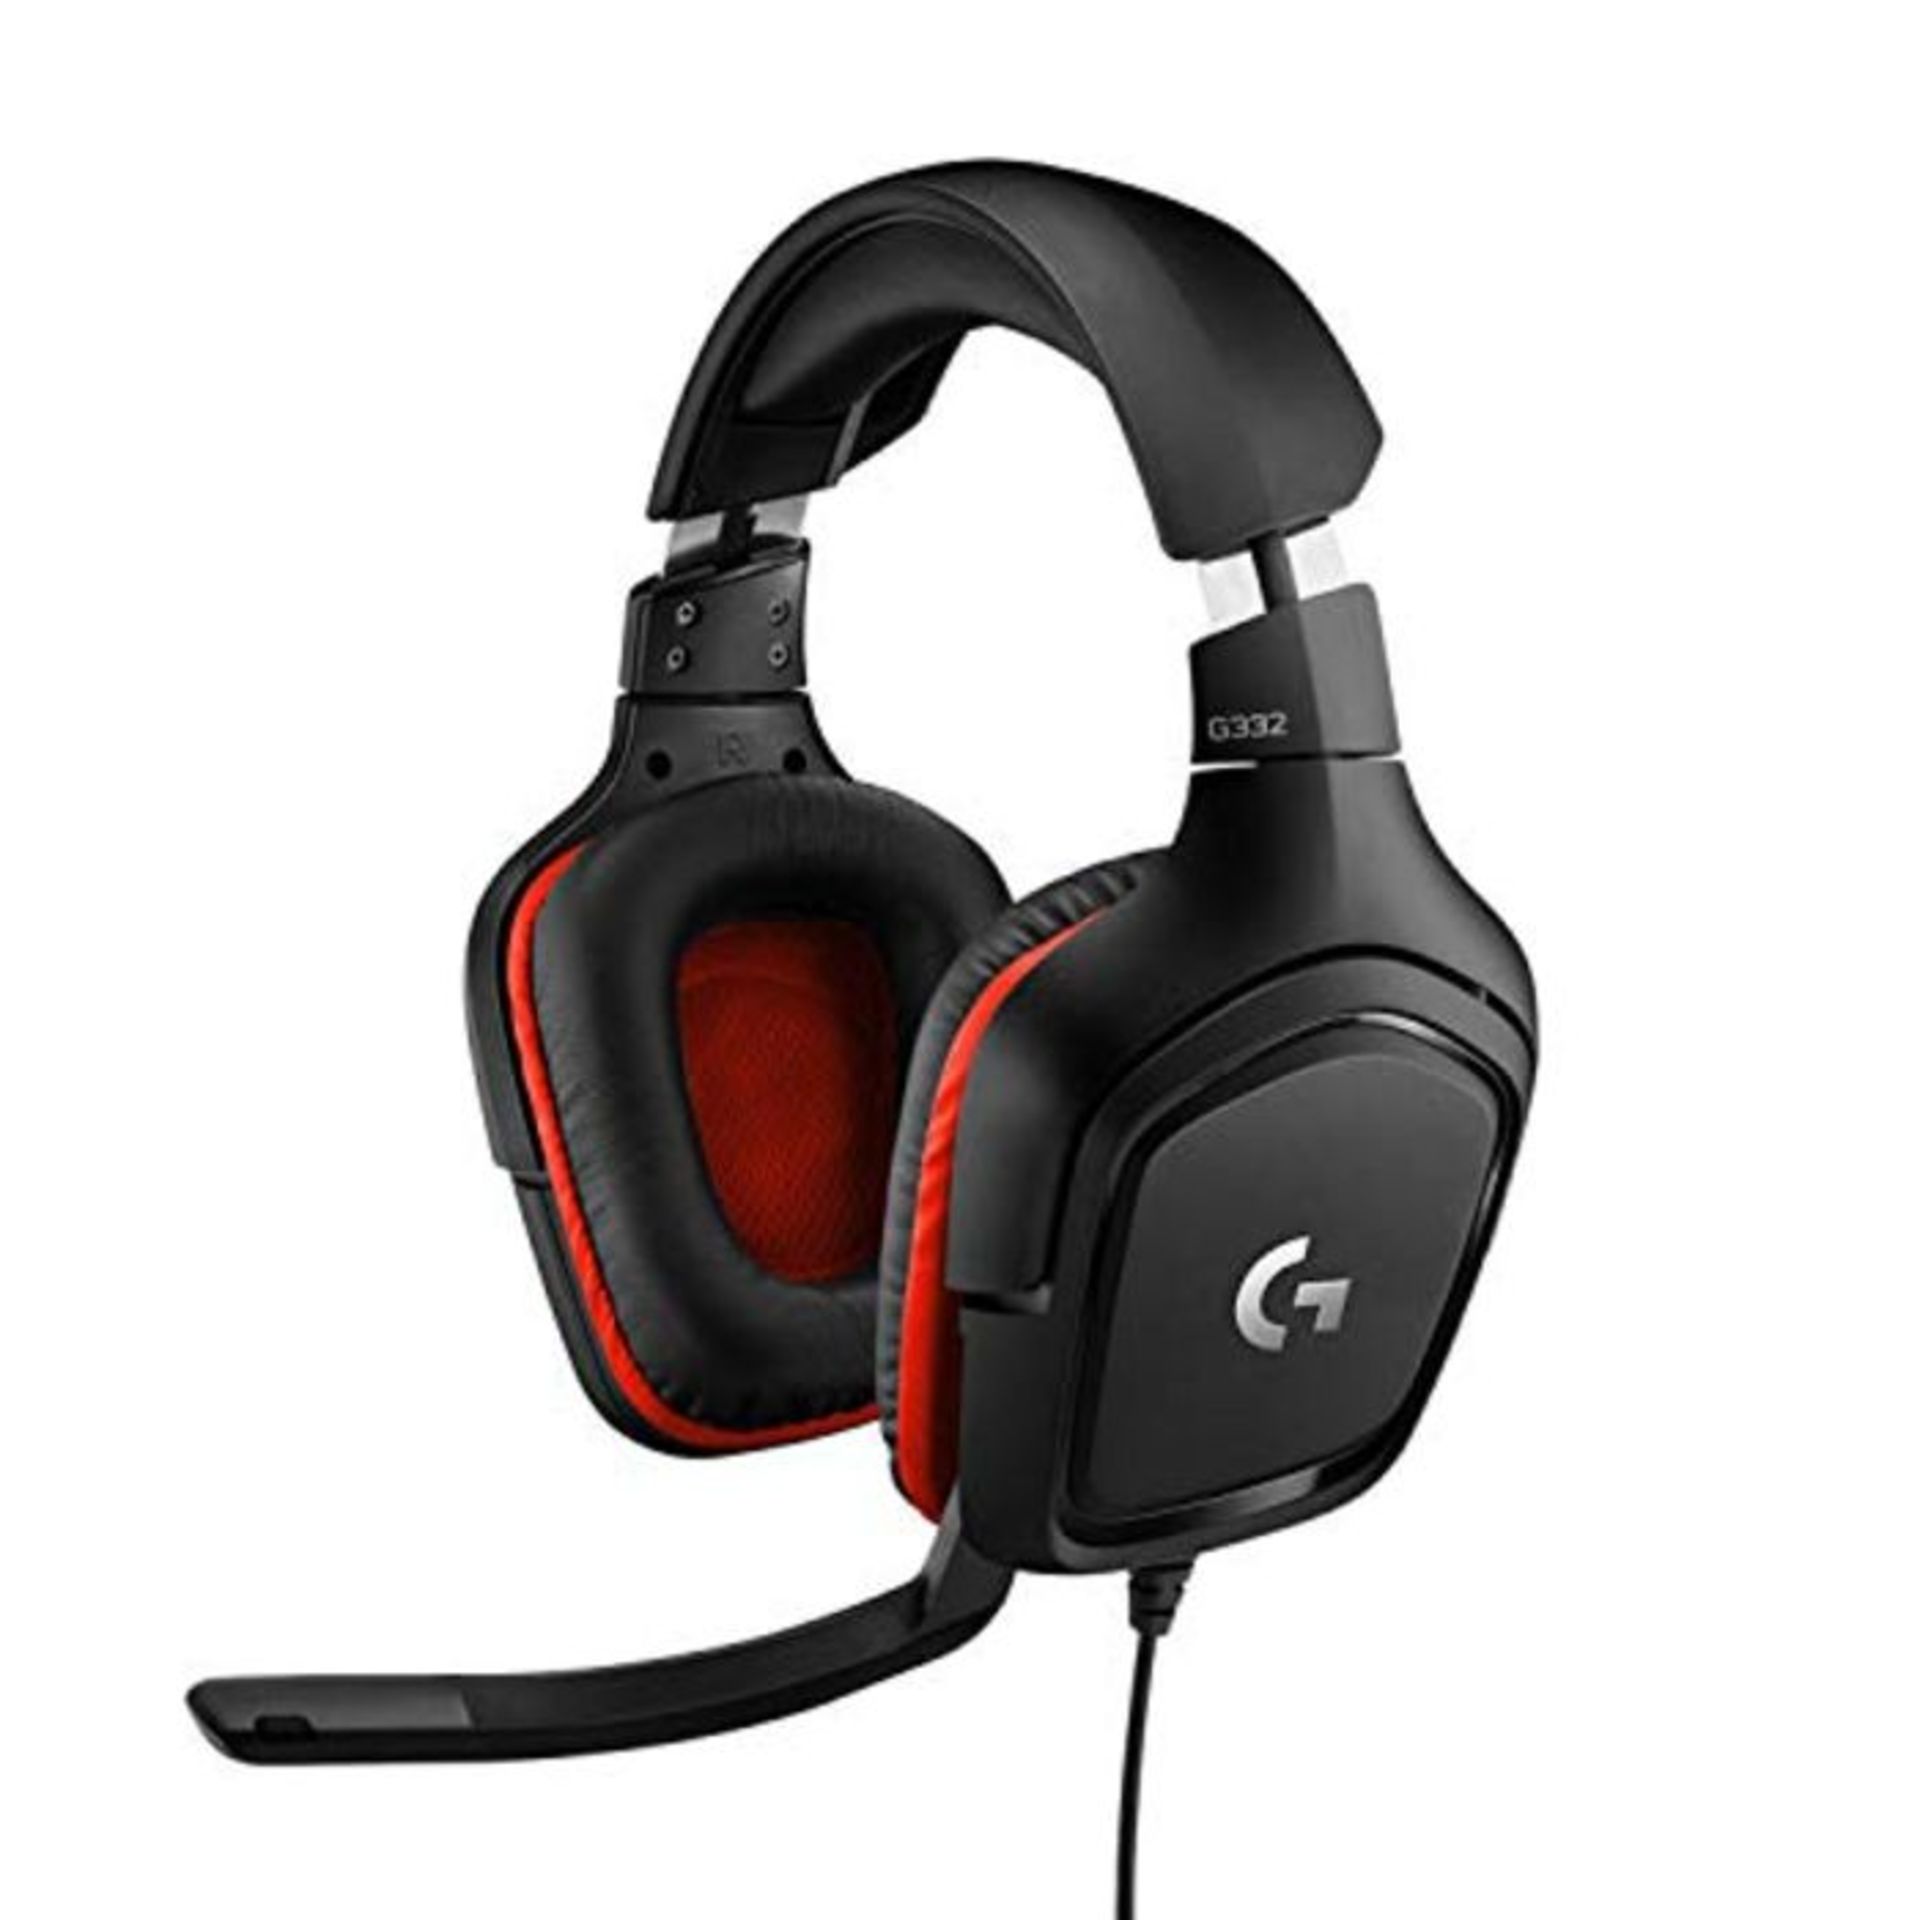 [CRACKED] Logitech G332 Wired Gaming Headset, 50 mm Audio Drivers, Rotating Leatherett